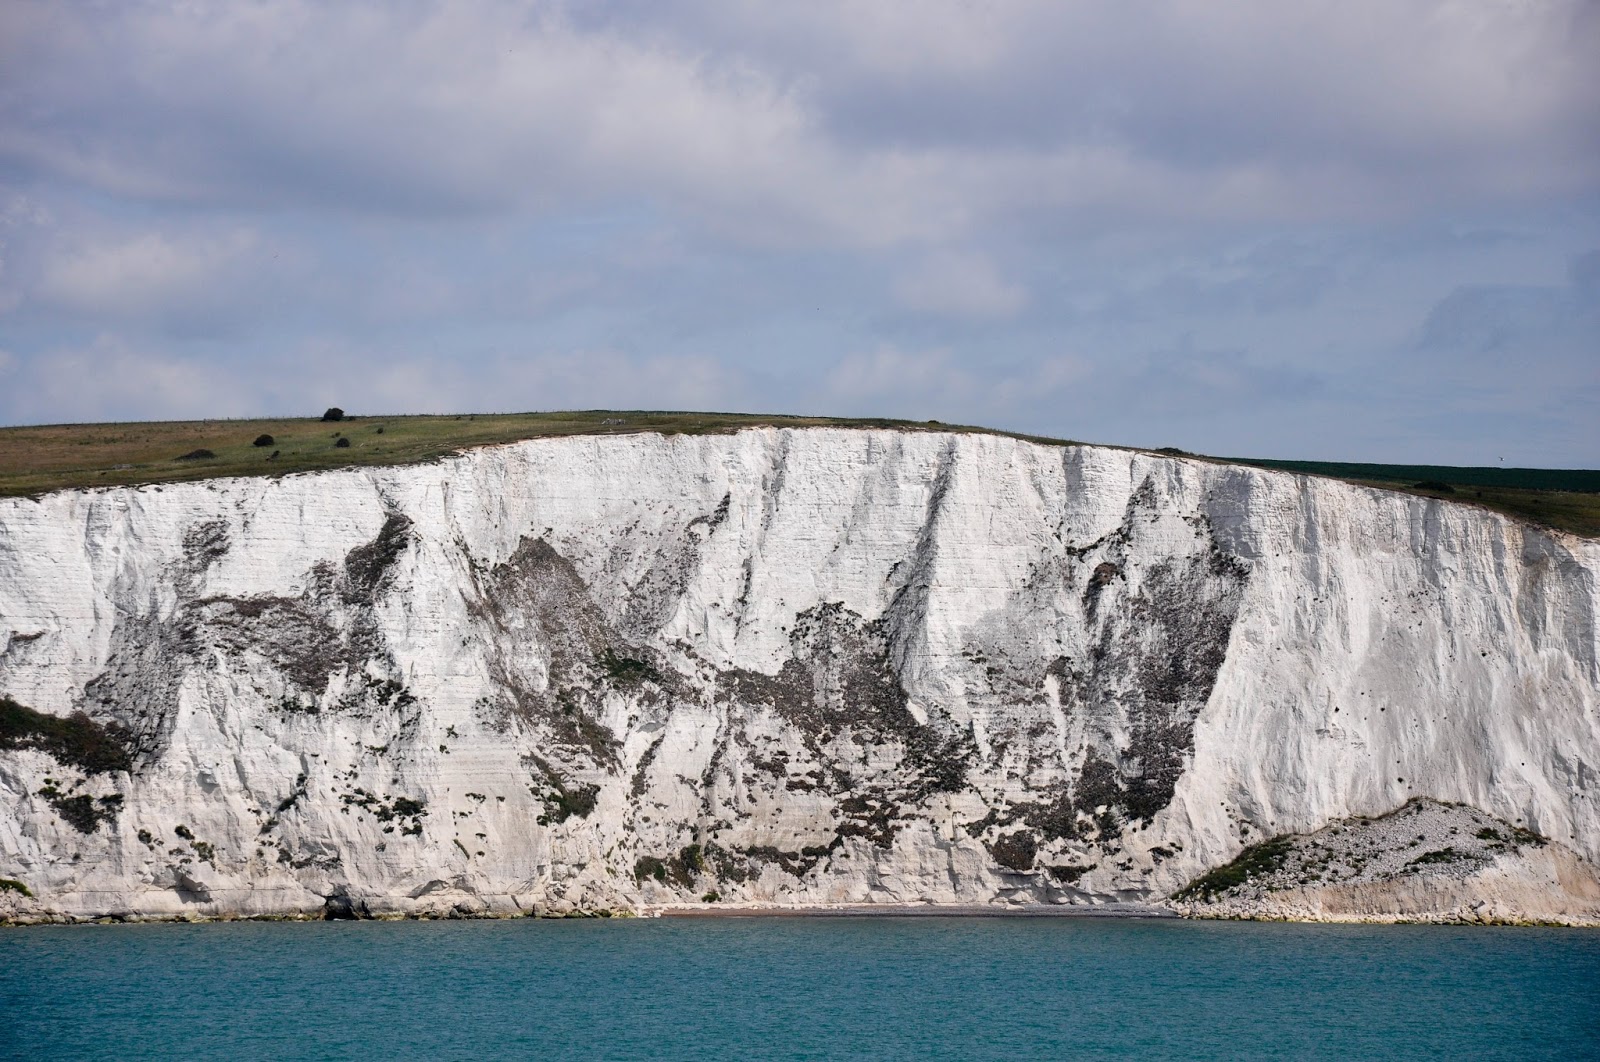 A close-up of the white cliffs of Dover seen from a DFDS ferry after crossing the English Channel back from France